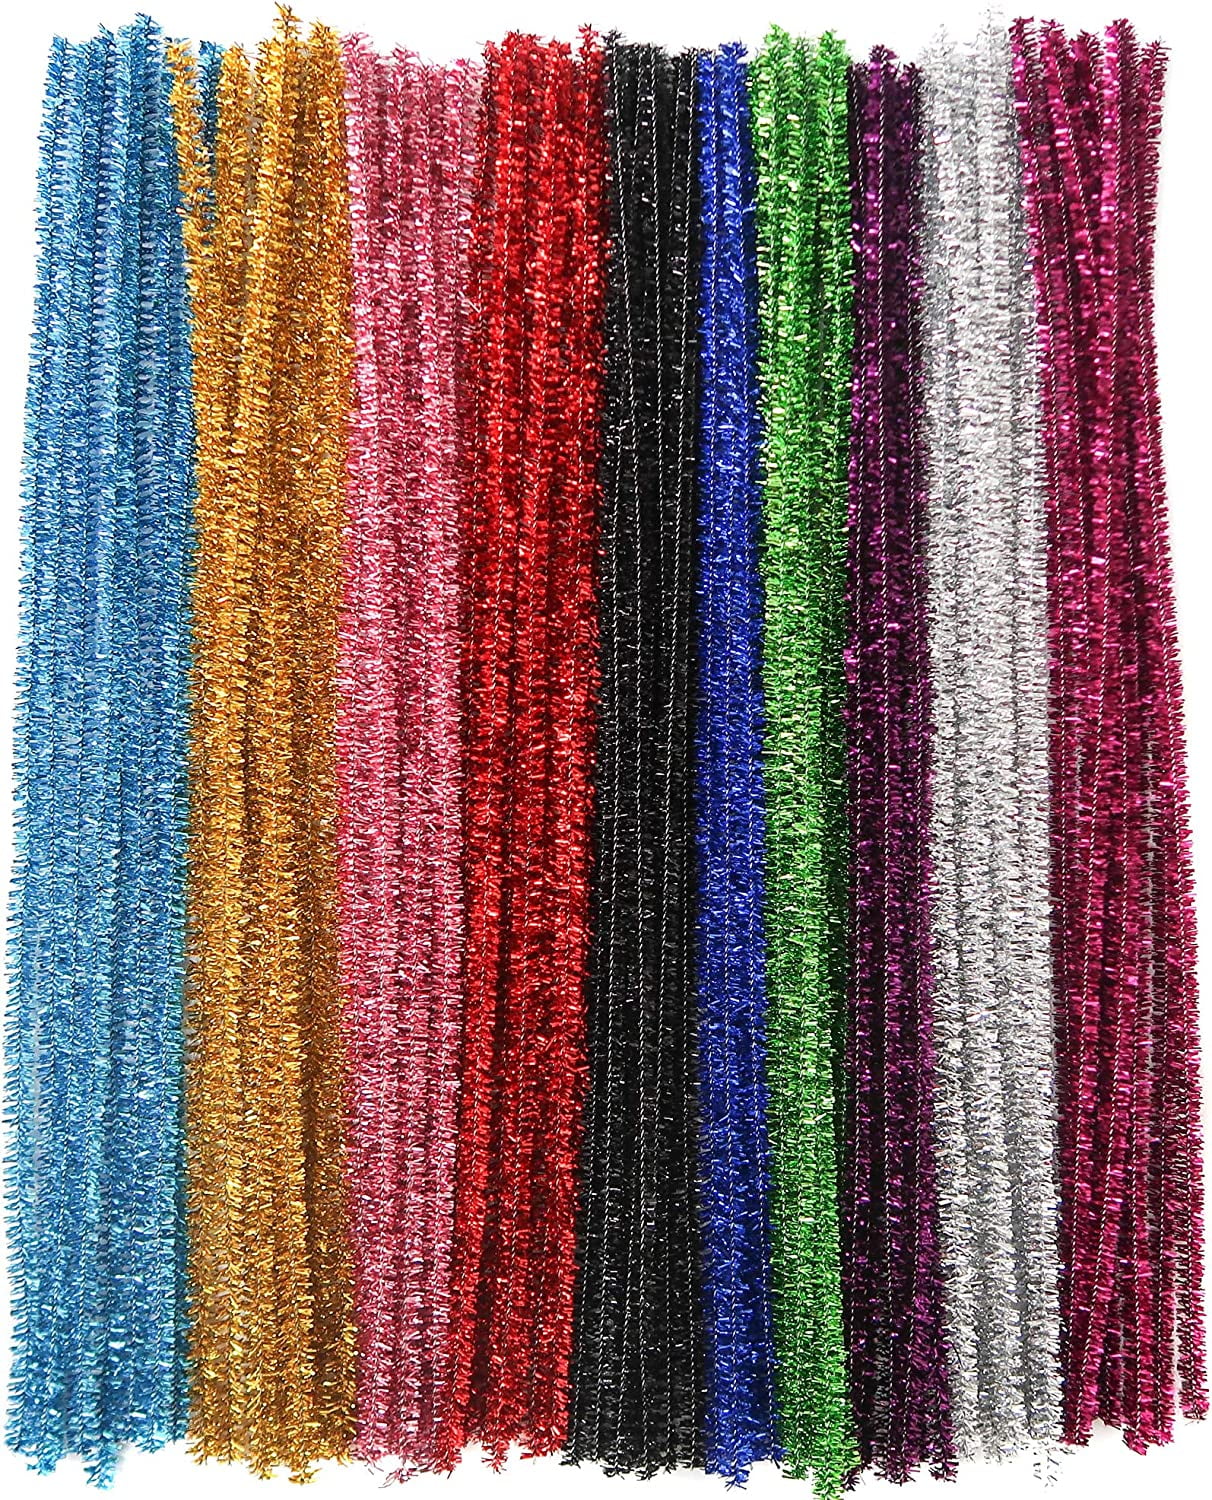 KASEMI Glitter Pipe Cleaners,900 pcs&18 Assorted Colors 12 inch Chenille  Stems for DIY Art Creative Crafts Decorations